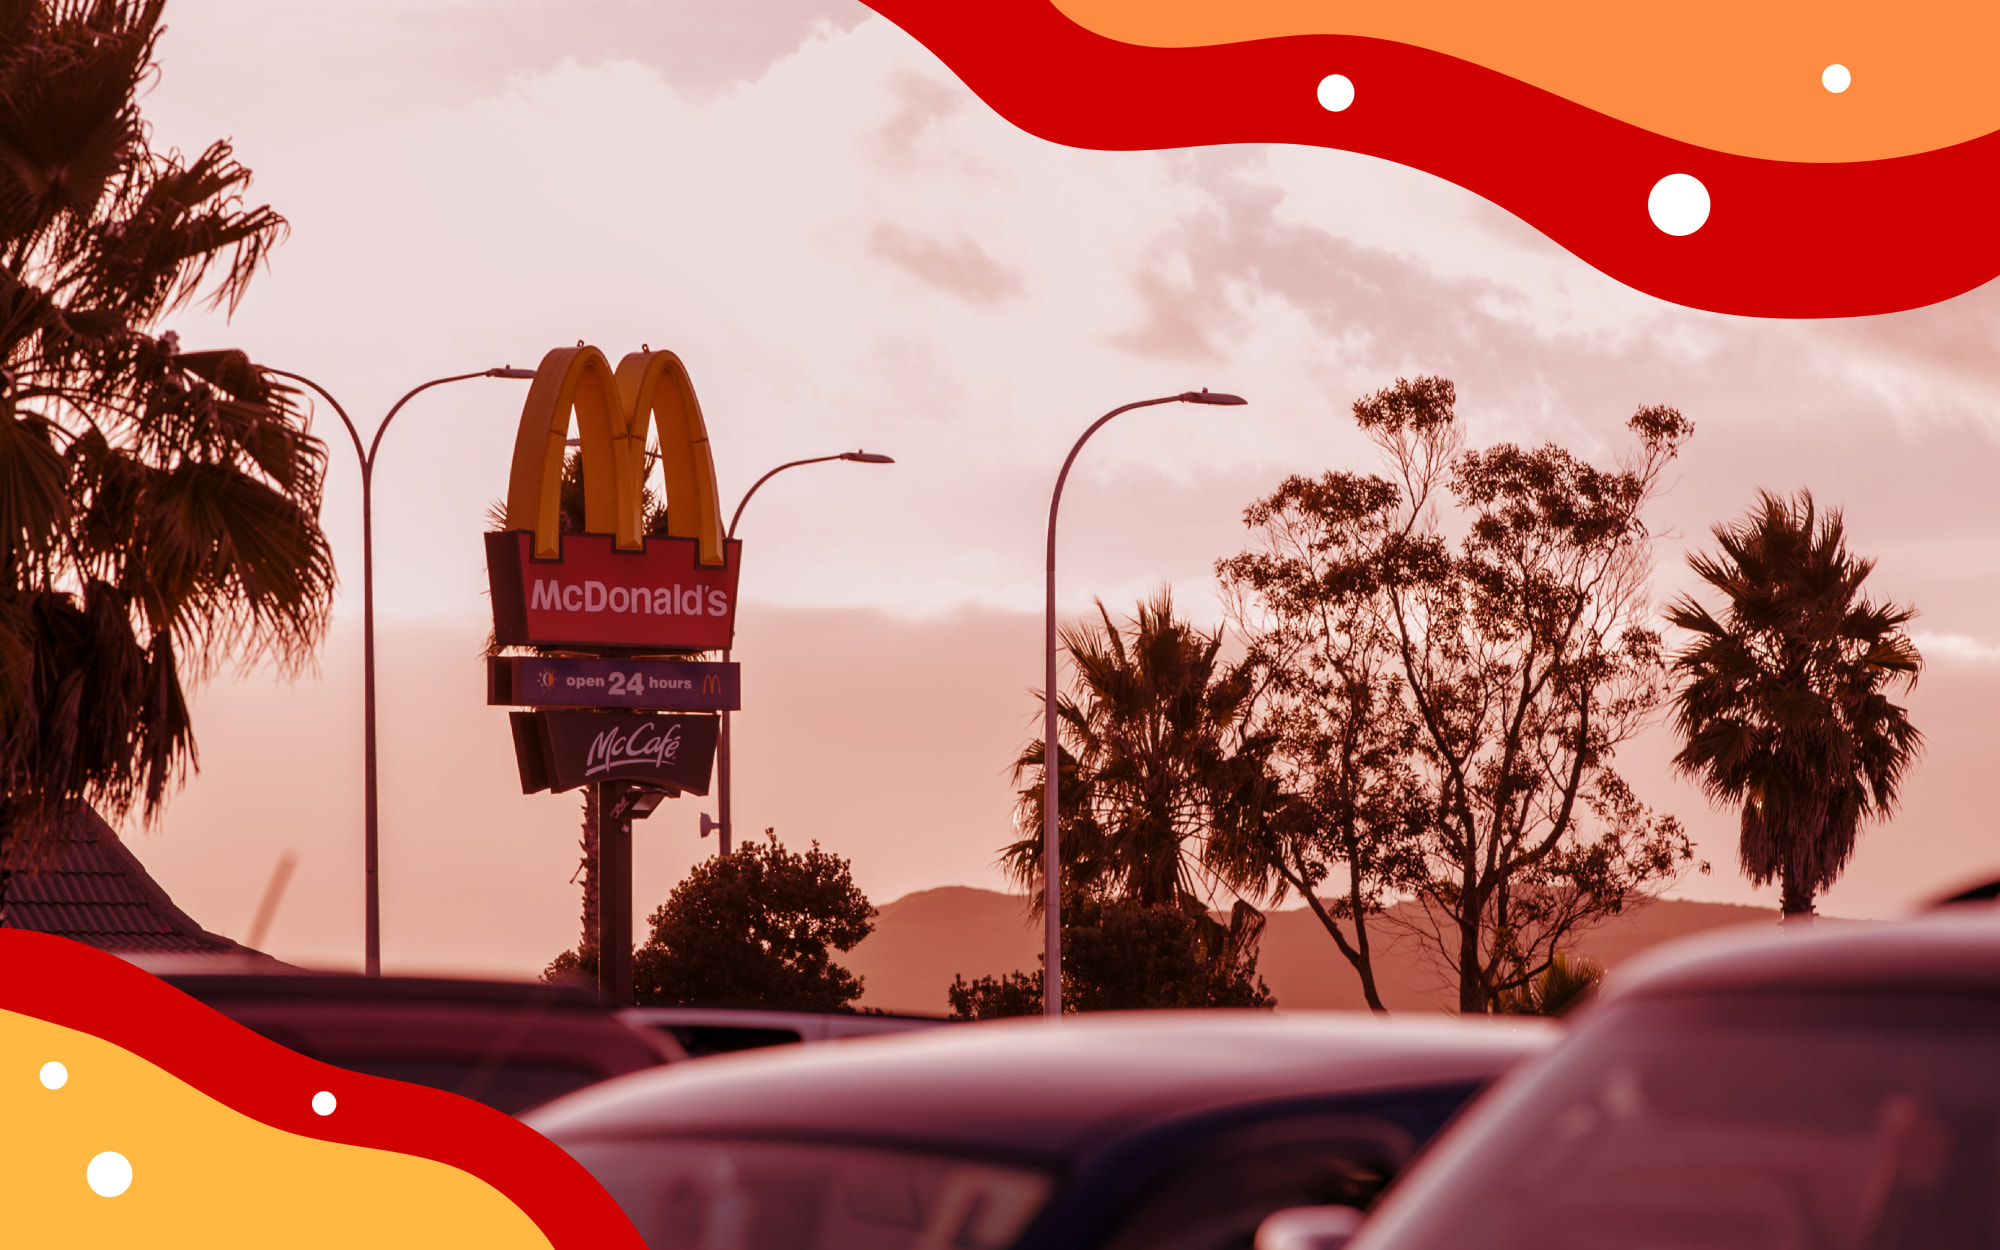 McDonald's advertising with stylised yellow and red border